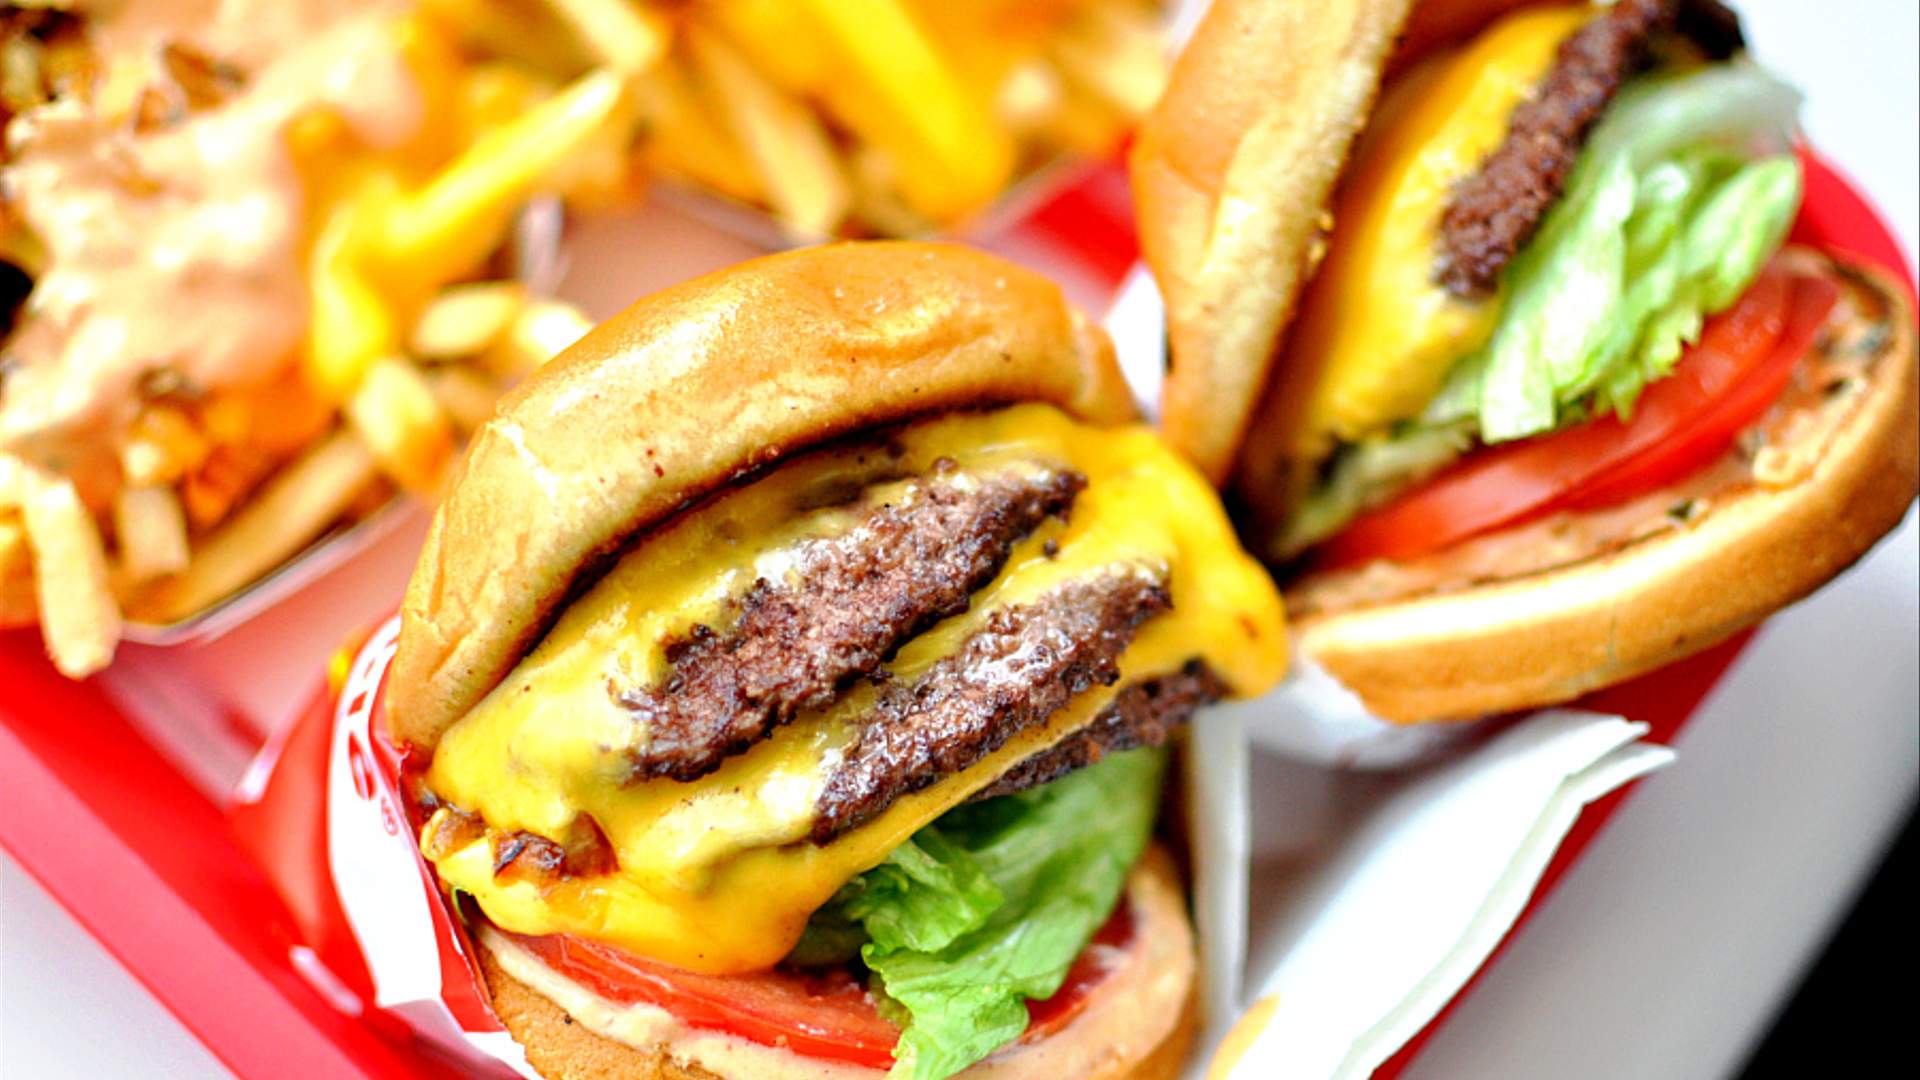 US burger chain In-N-Out is popping up in Sydney today for one day only